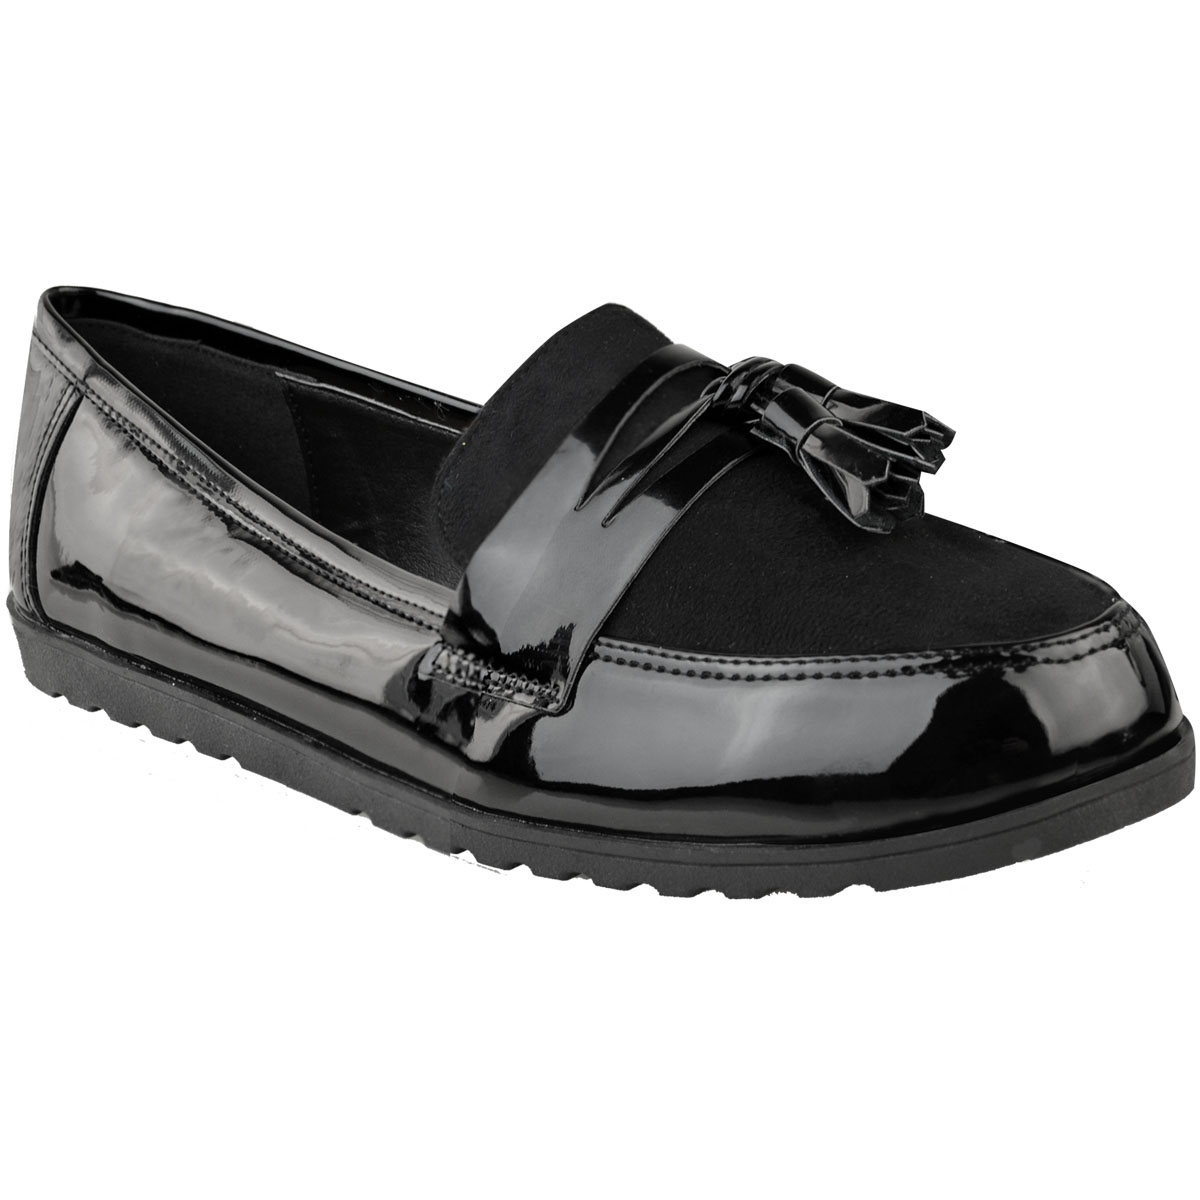 Womens Ladies Black Loafers Work Formal School Shoes Flat Pumps Casual Size New